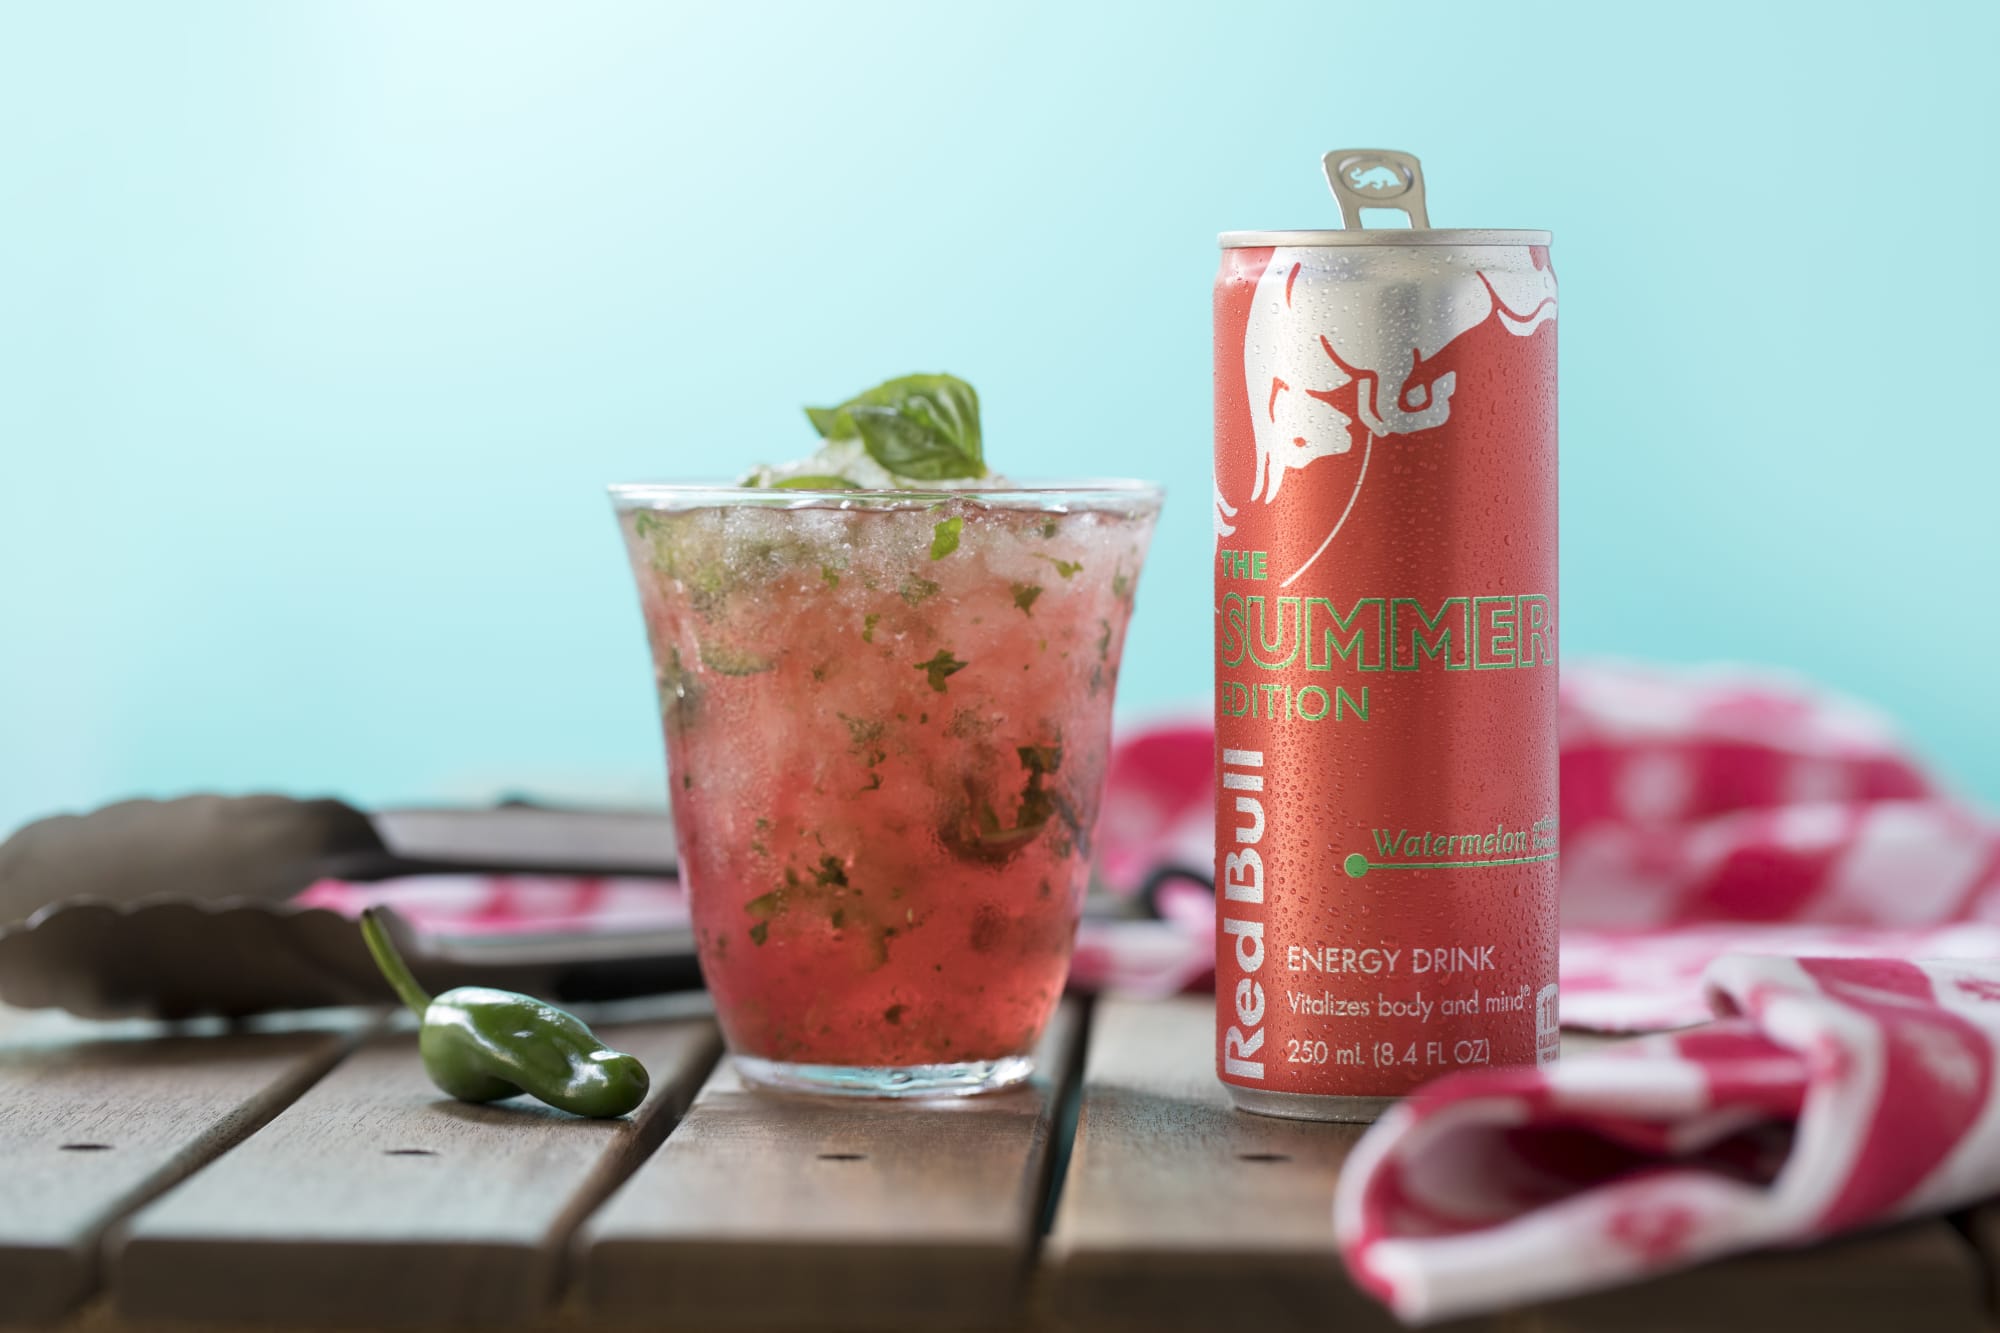 Red Bull Summer Edition Watermelon makes for the perfect mocktail